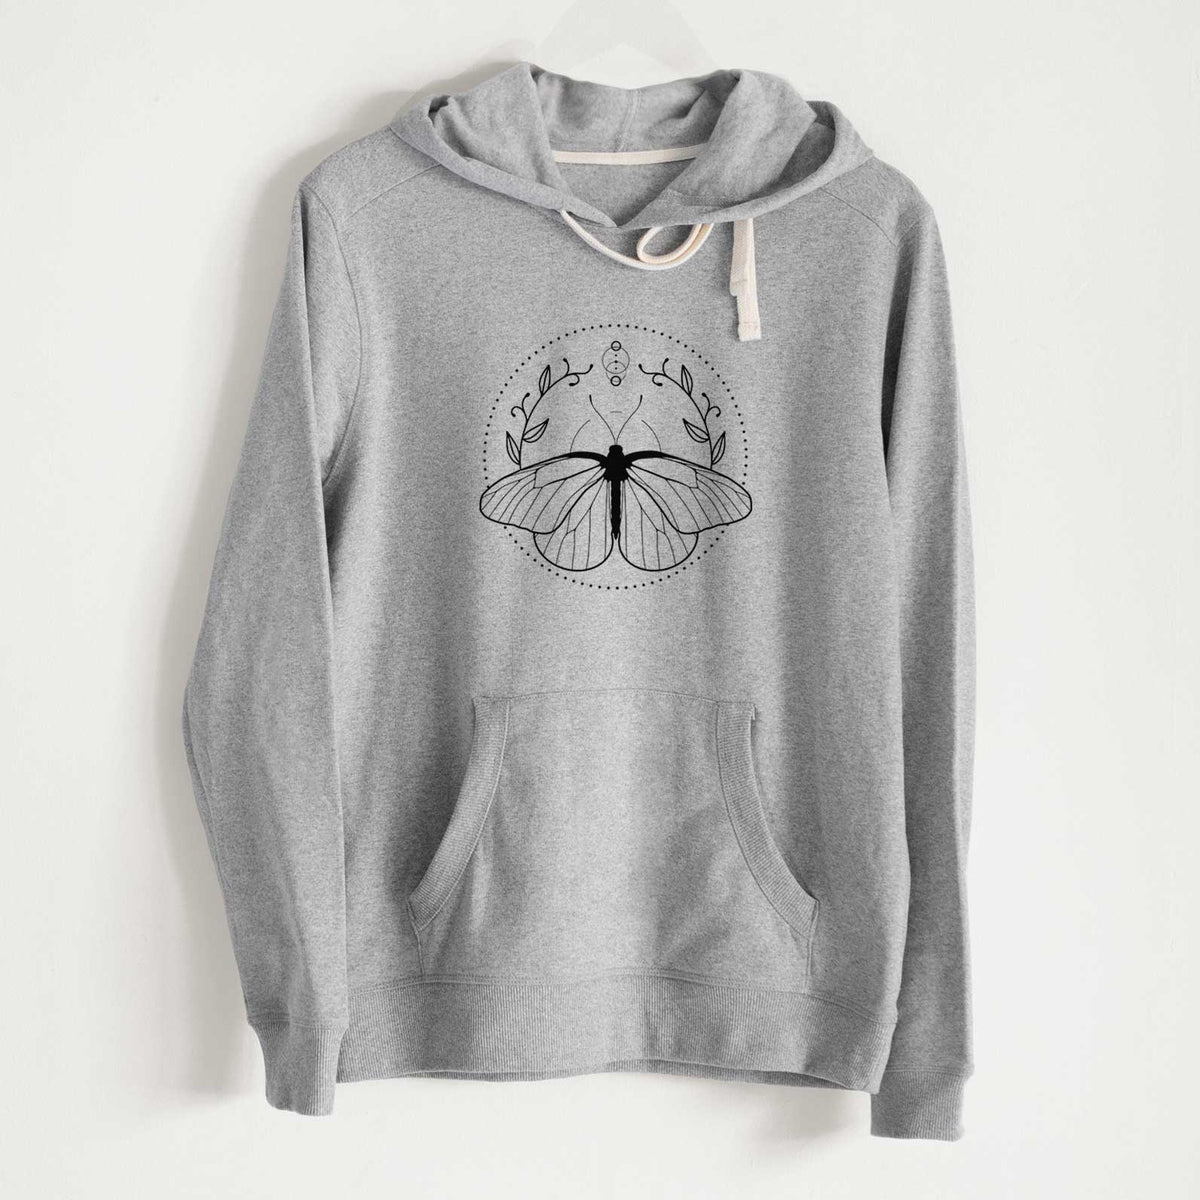 Aporia crataegi - Black Veined White Butterfly - Unisex Recycled Hoodie - CLOSEOUT - FINAL SALE